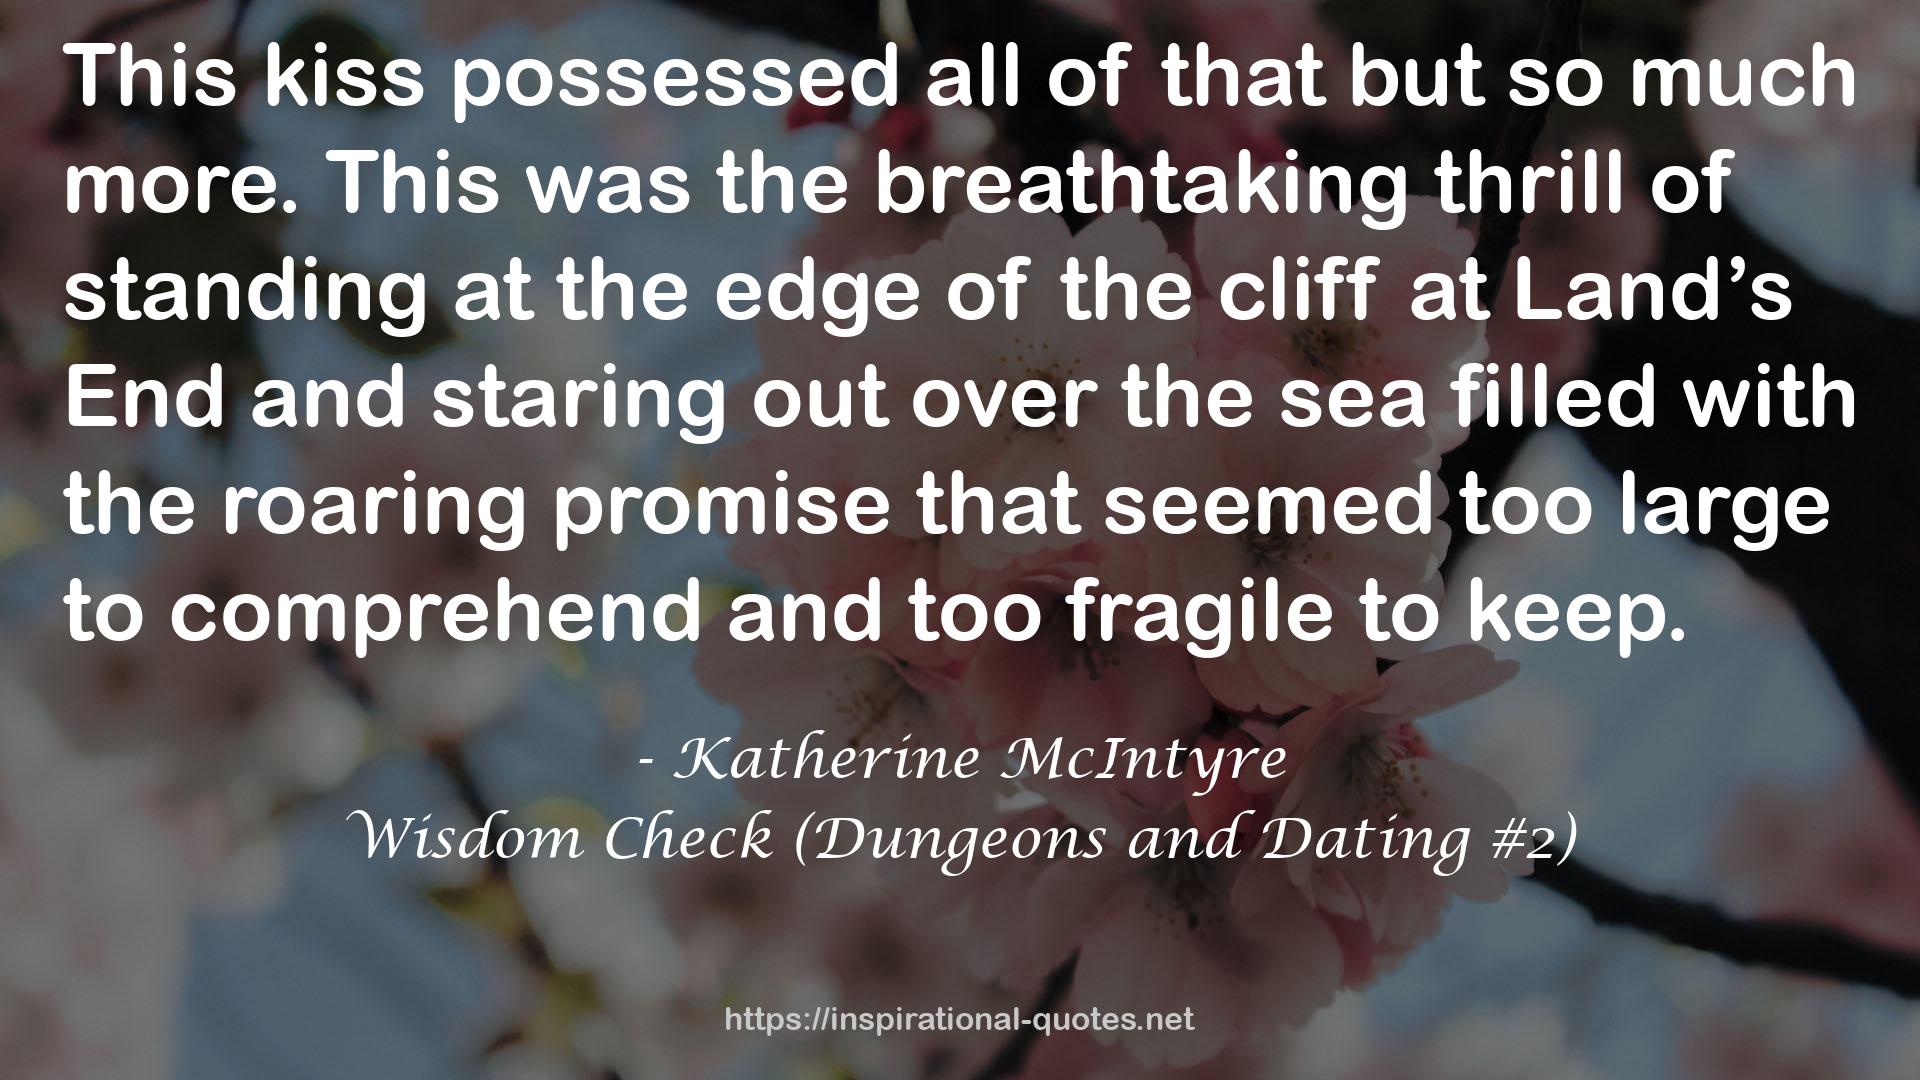 Wisdom Check (Dungeons and Dating #2) QUOTES